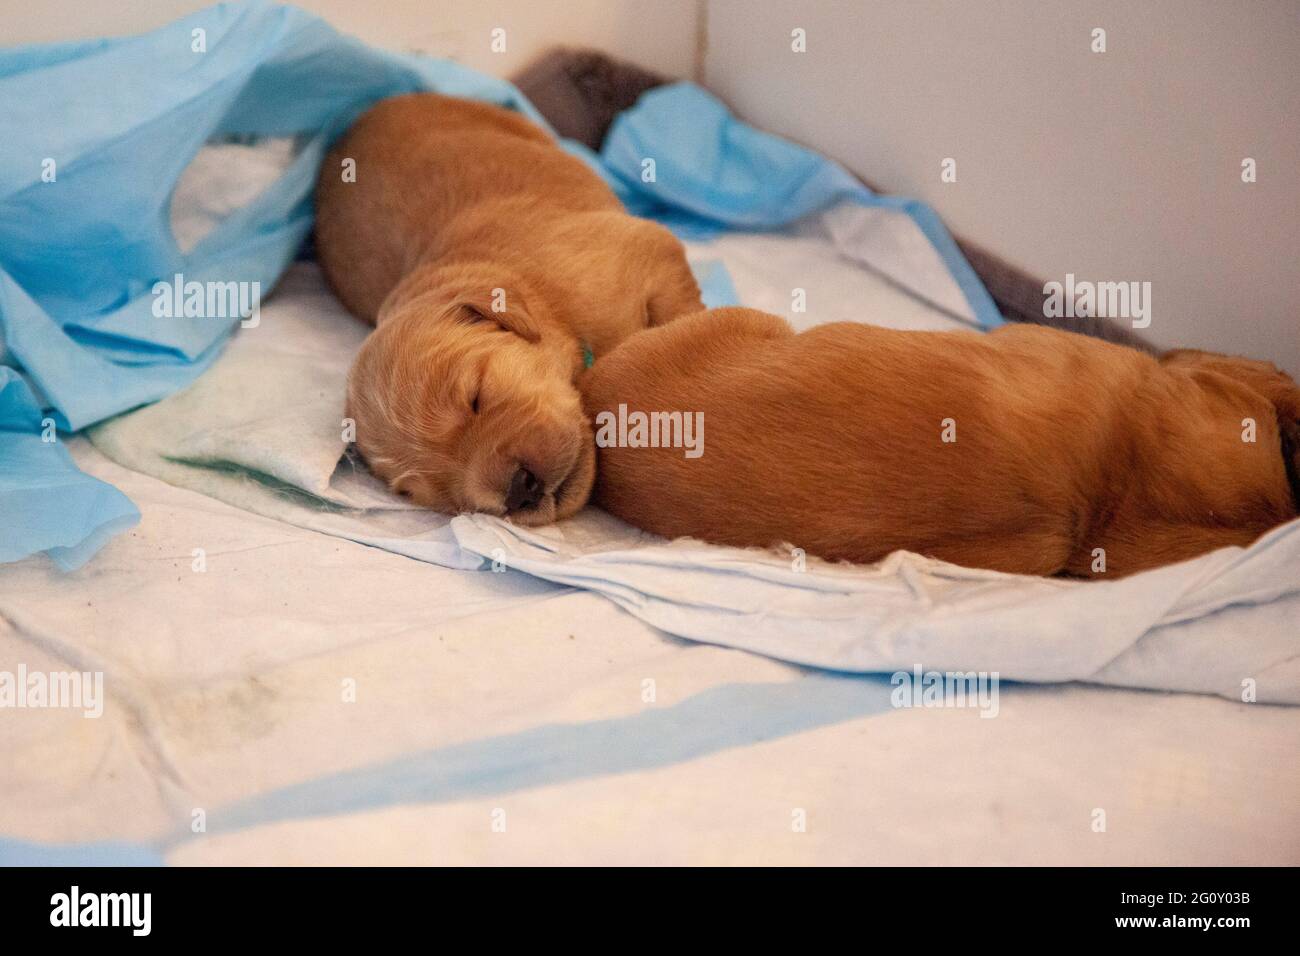 two small golden puppies sleep on their puppy training pads in the whelping box Stock Photo